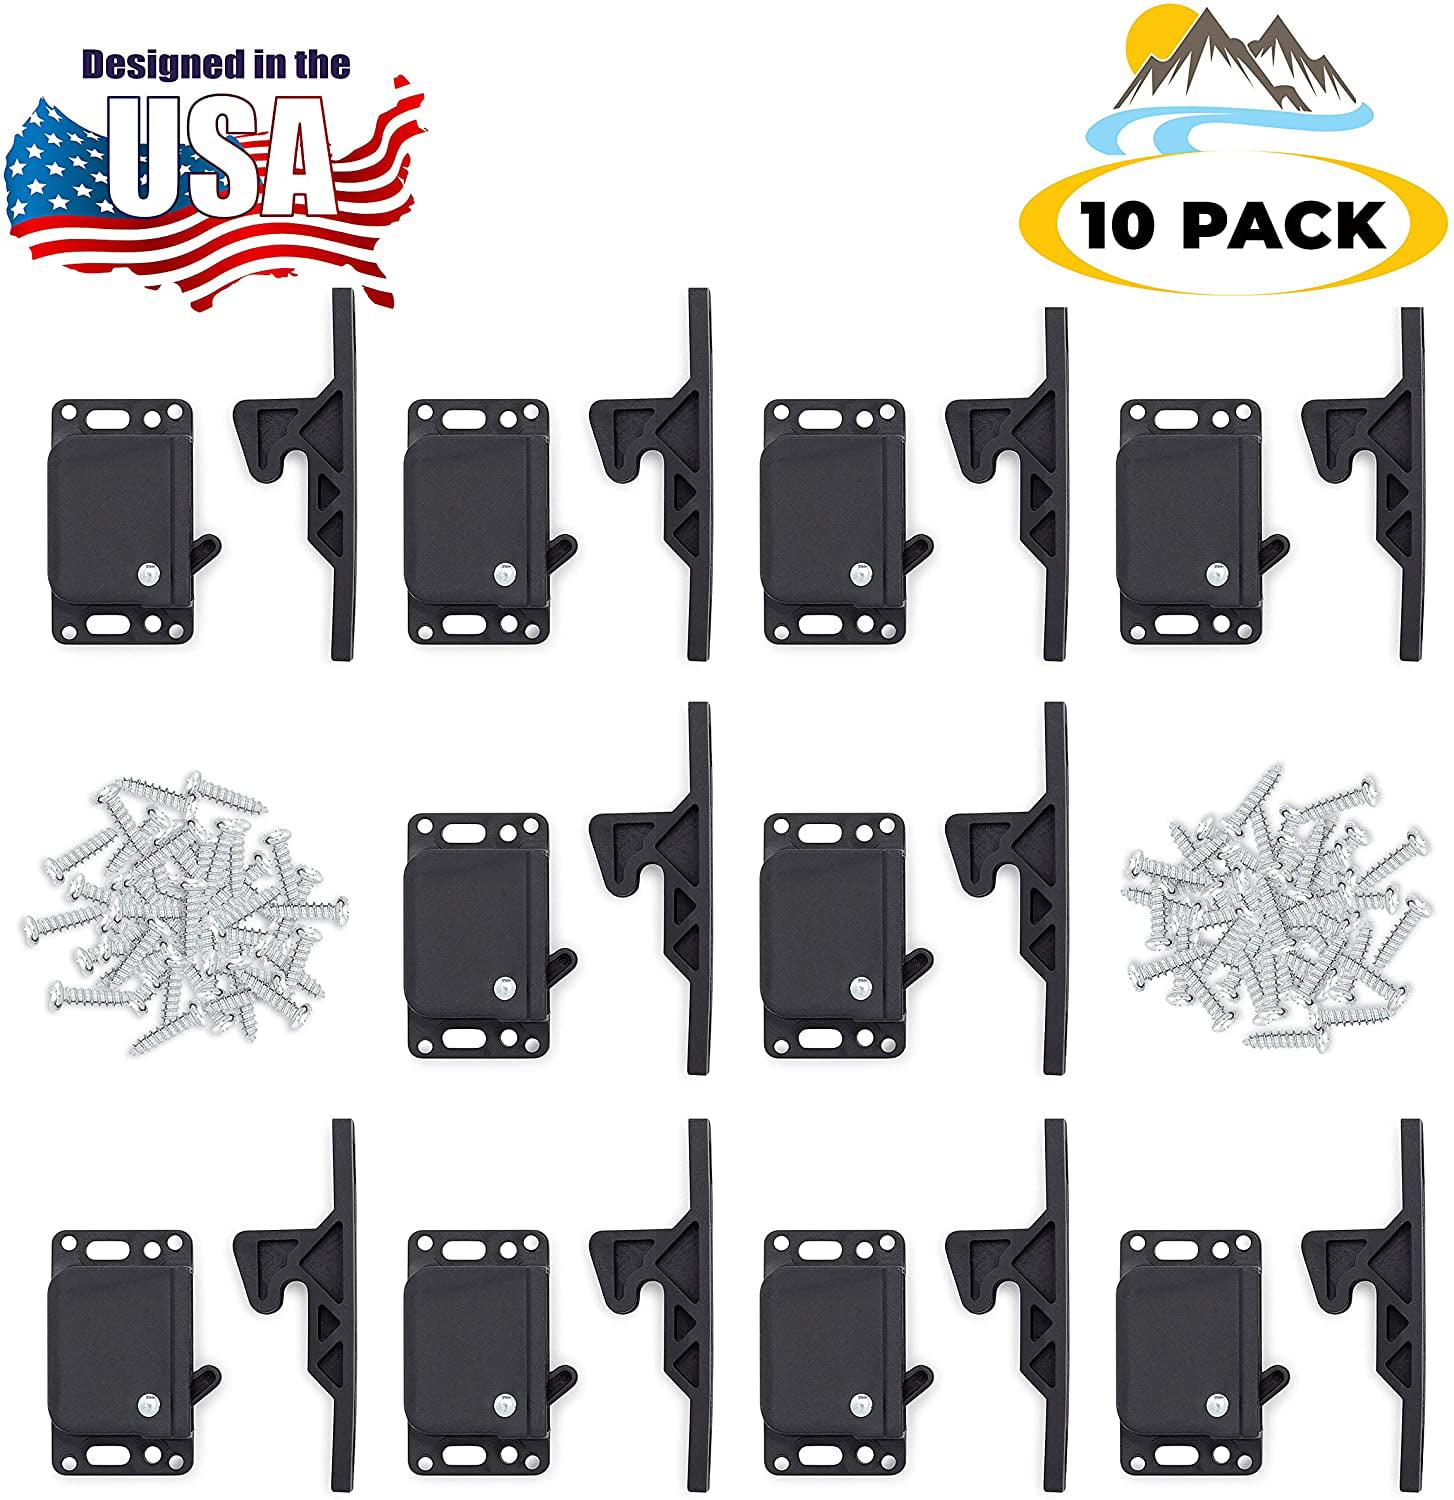 Motor Home Cabinet Door Latch/ 8 Pack RV Drawer Latches 5 lbs Full Force Cabinet Latch Camper OEM Replacement Trailer Holder for Home/RV Cabinet Doors with Mounting Screws Perfect for RV 